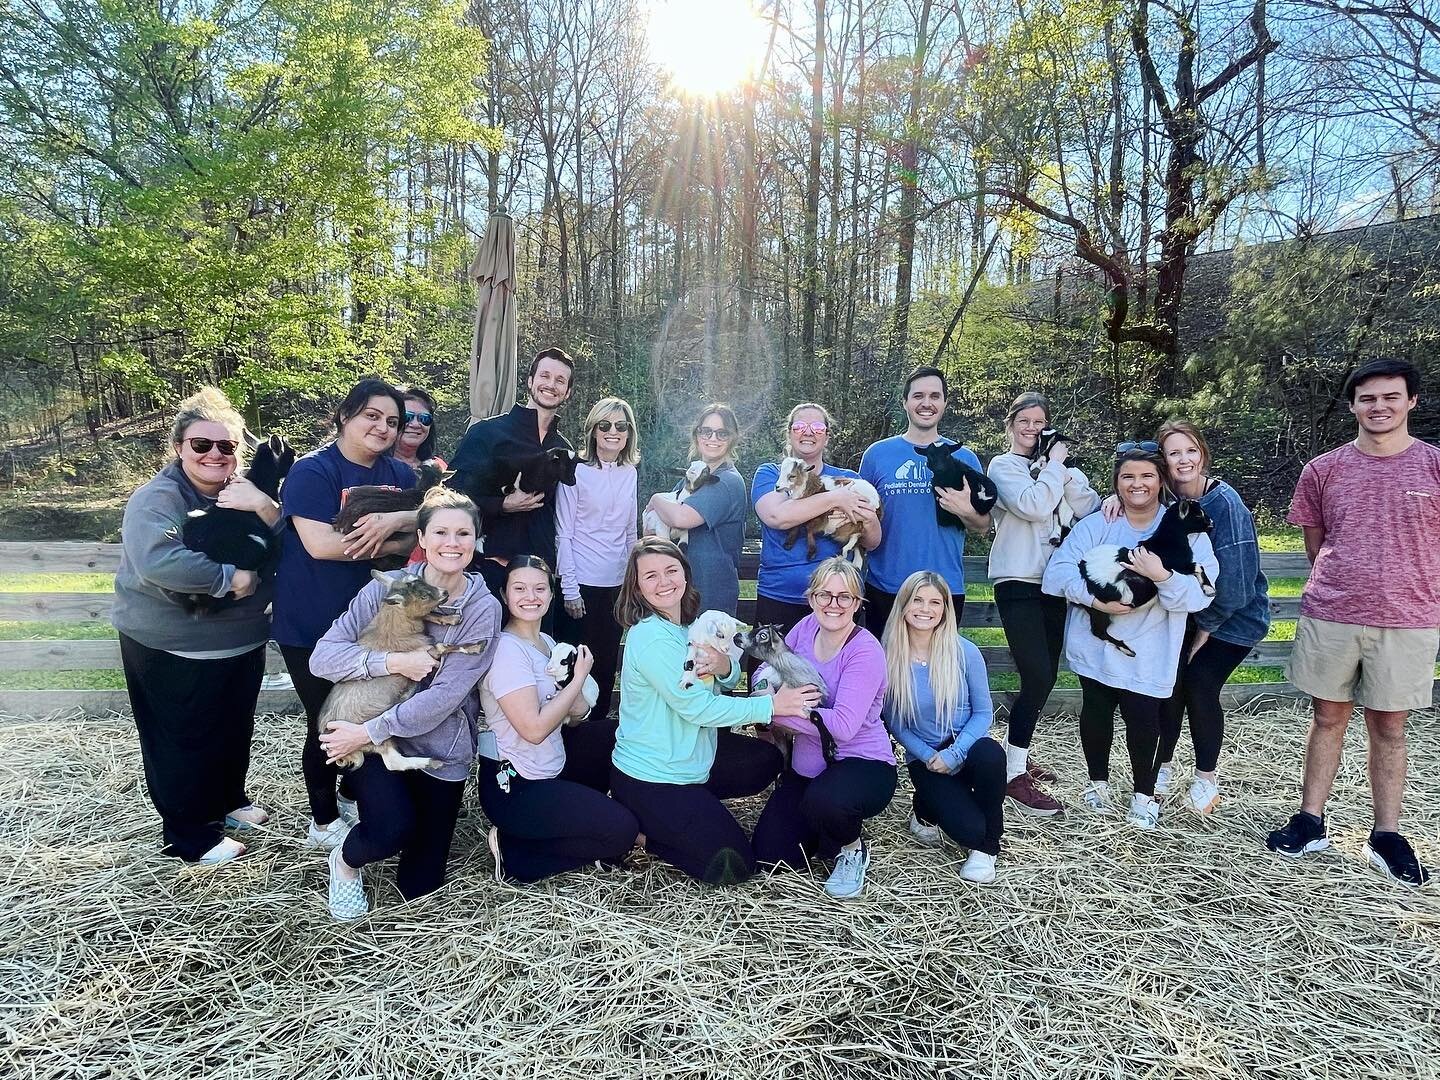 Had a blast at @goatyogabham yesterday 🐐 Always a fun time with this team 💙 

#samuelsonorthodontics 
#teambuilding